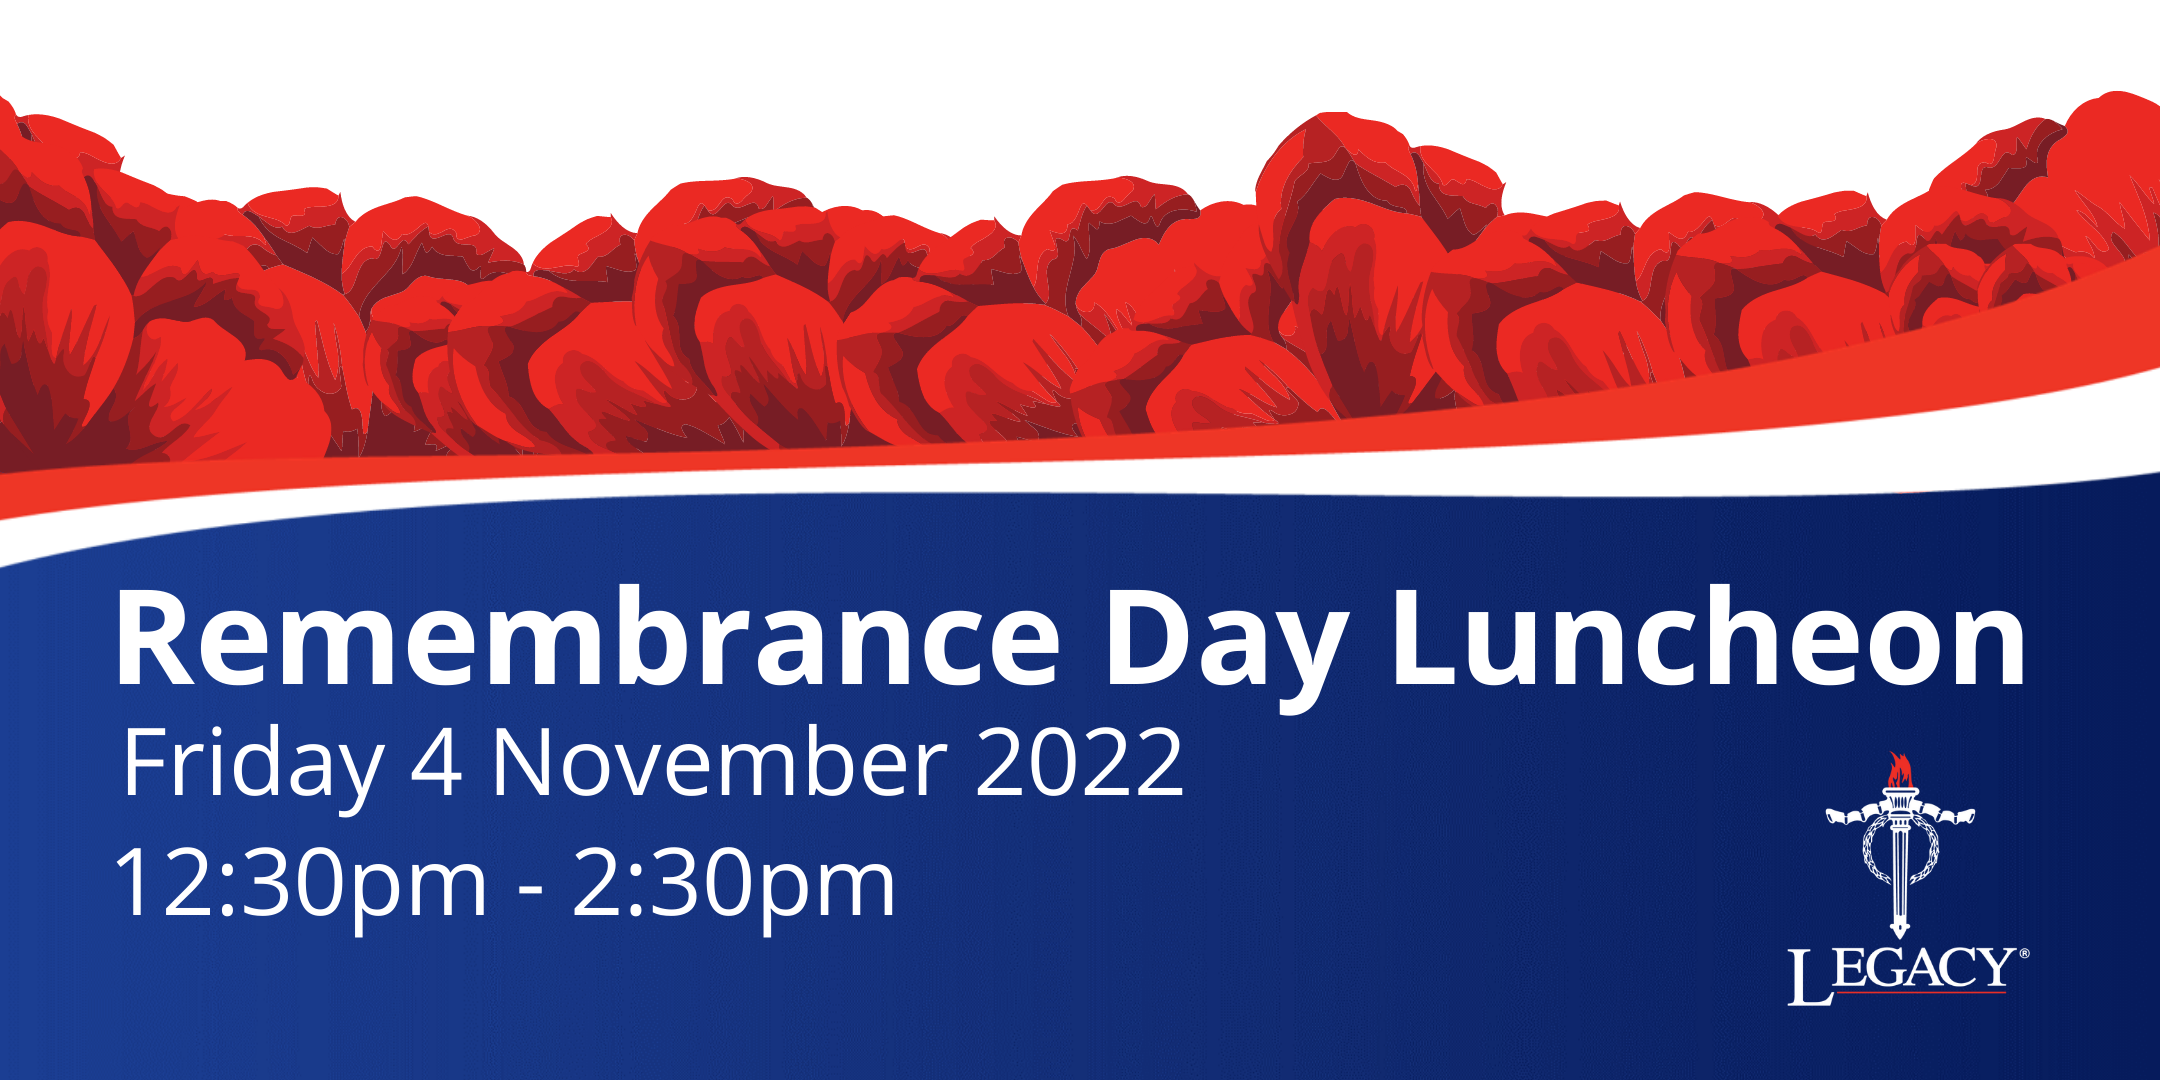 Remembrance Day Luncheon 2022